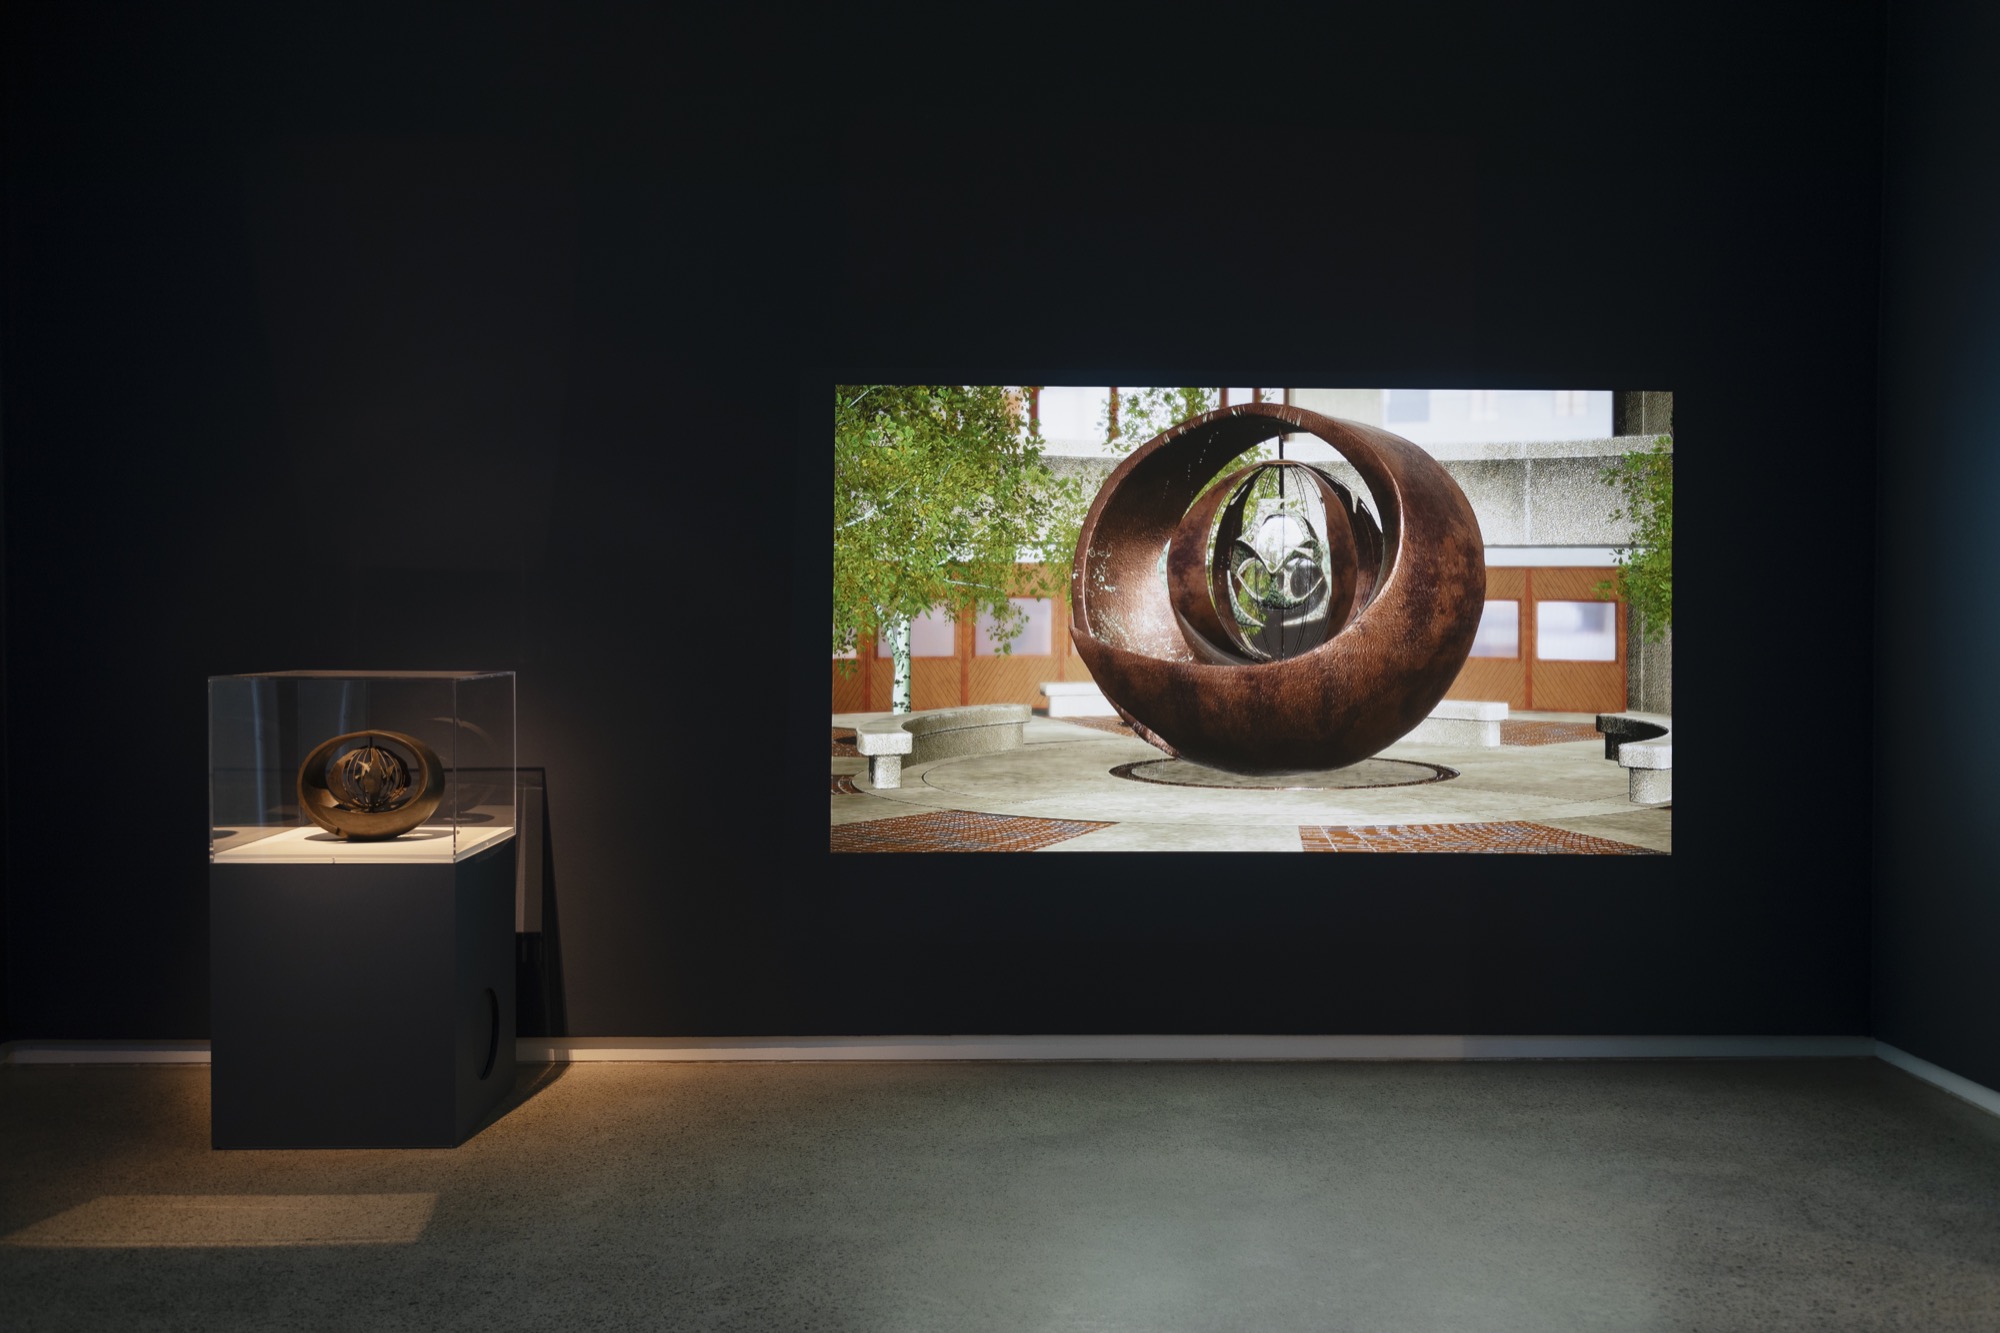 Installation view, Margel Hinder: Modern in Motion, Heide Museum of Modern Art, with Hinder’s <em>Maquette for Northpoint Fountain</em> (1975) and Andrew Yip’s <em>Margel Hinder Immersive I (Northpoint)</em> (2020).